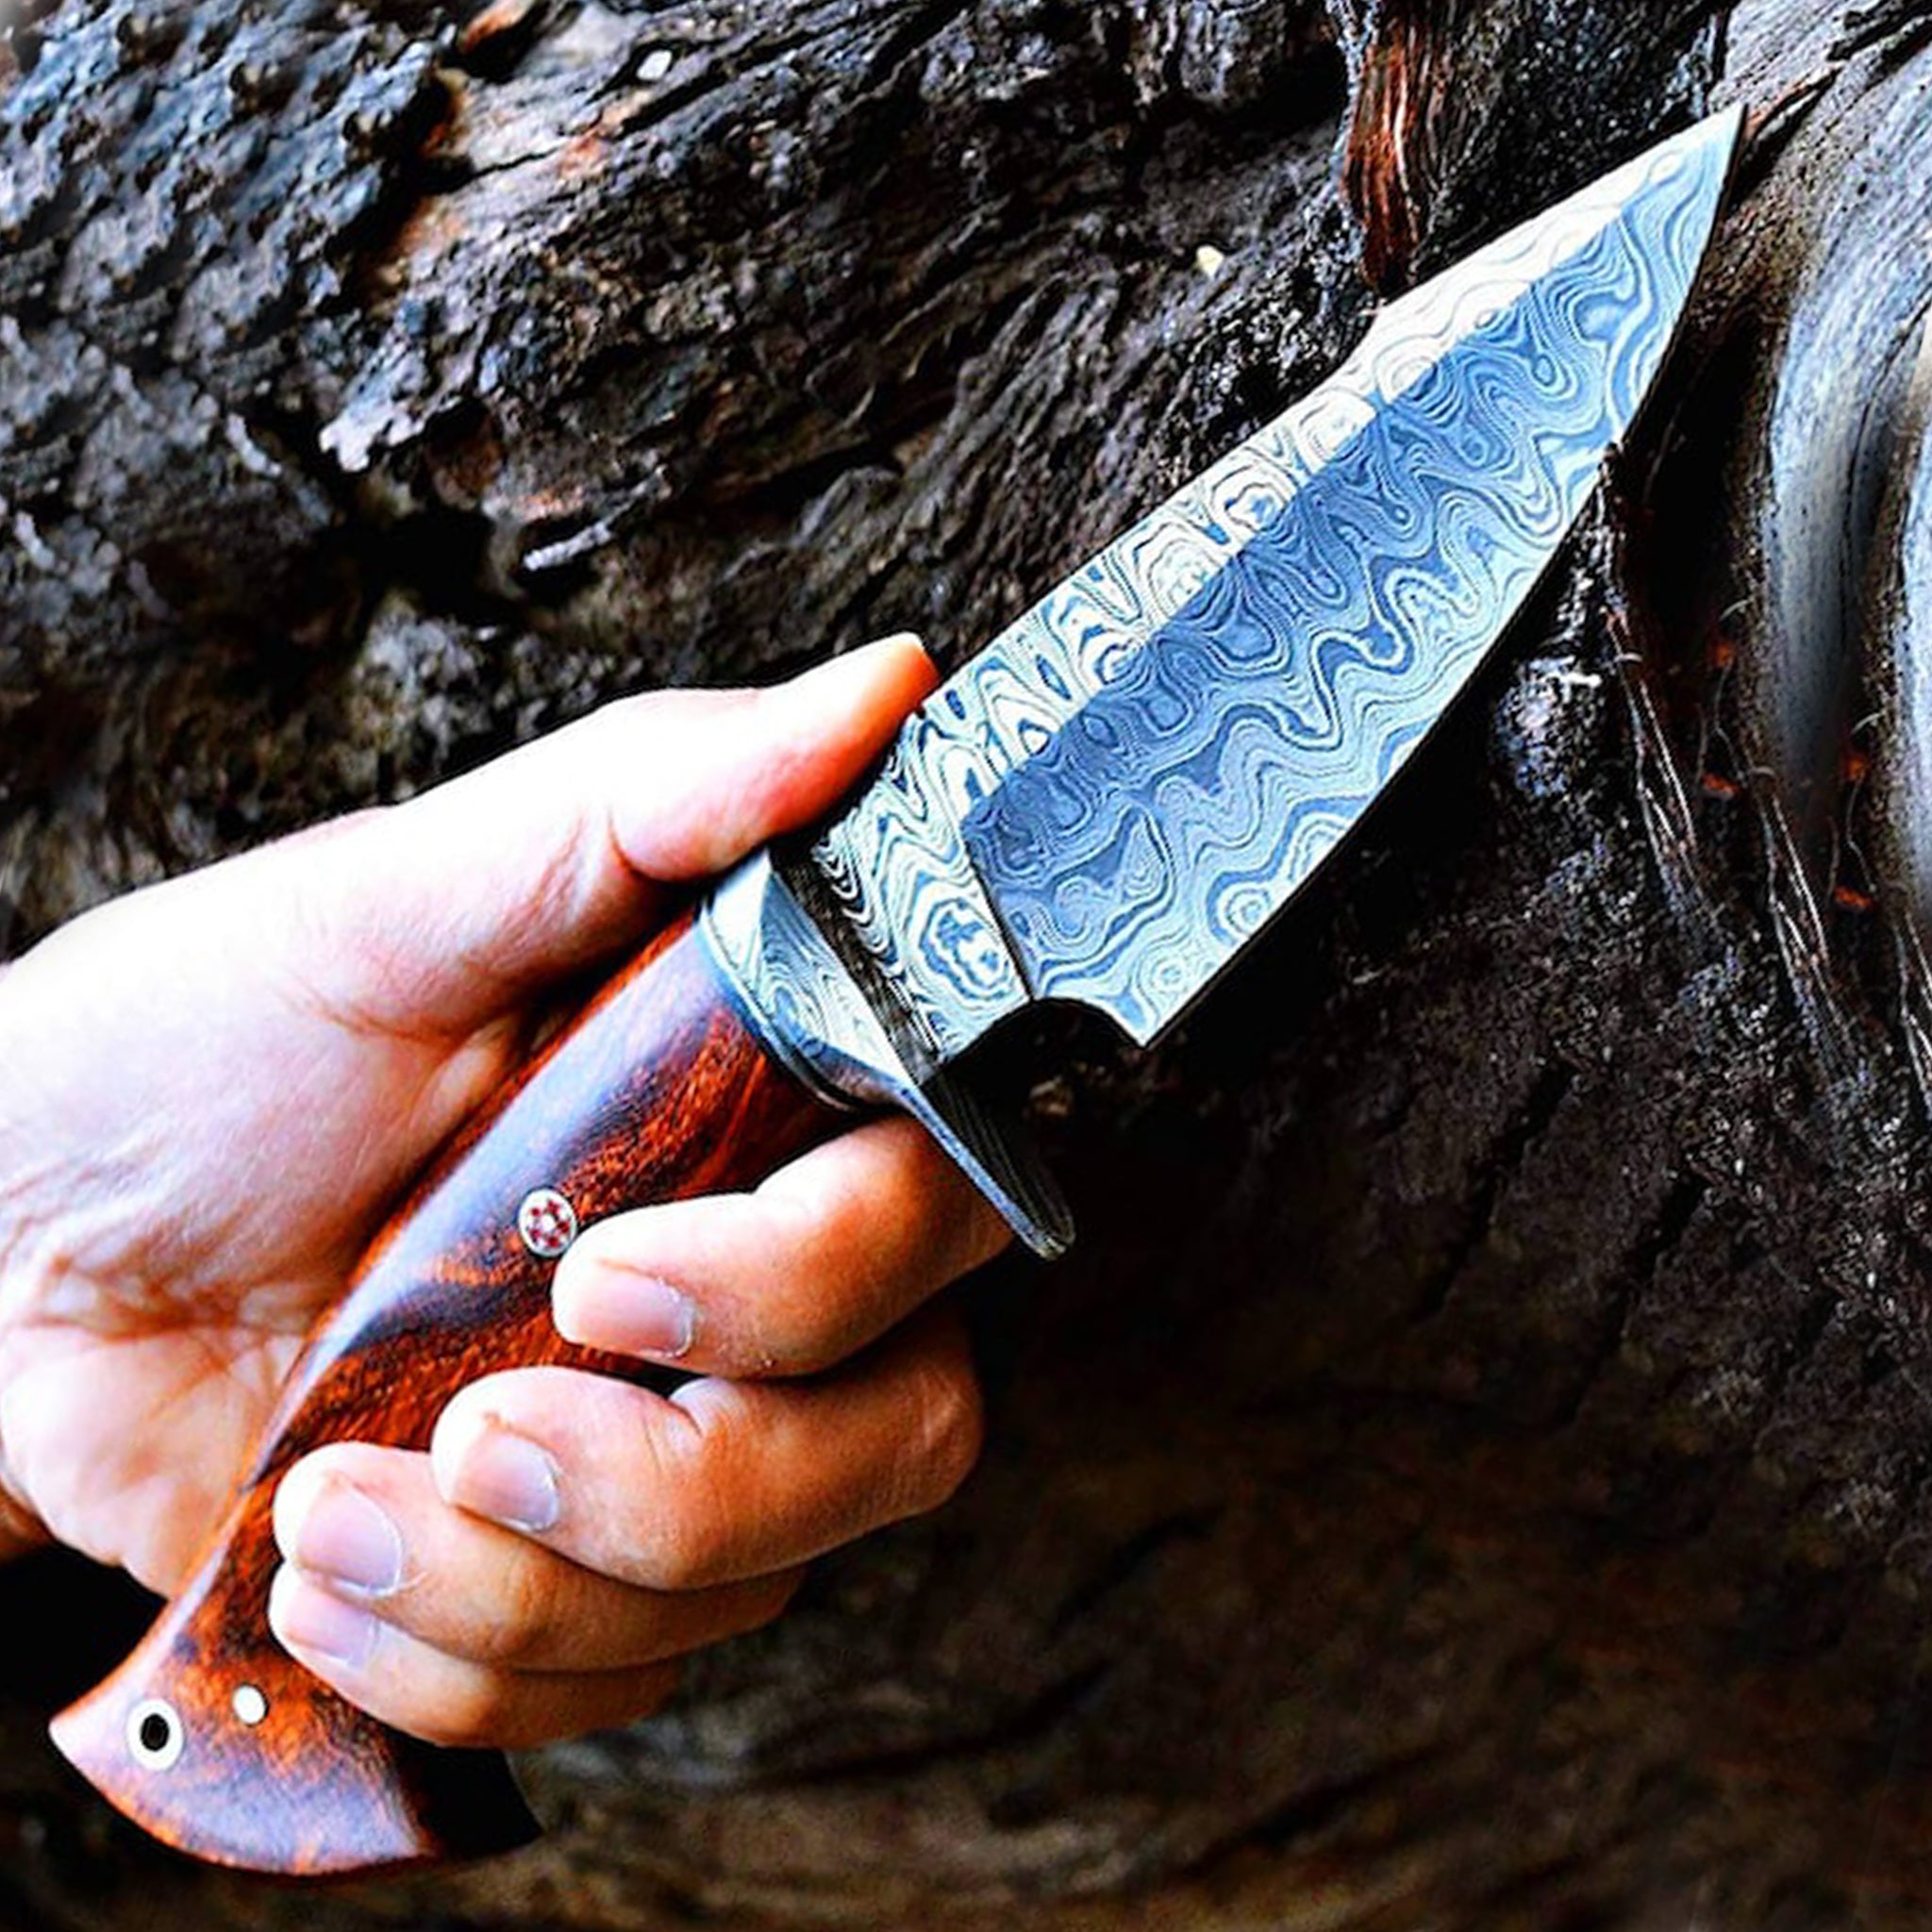 Damascus steel bowie knife forging process 